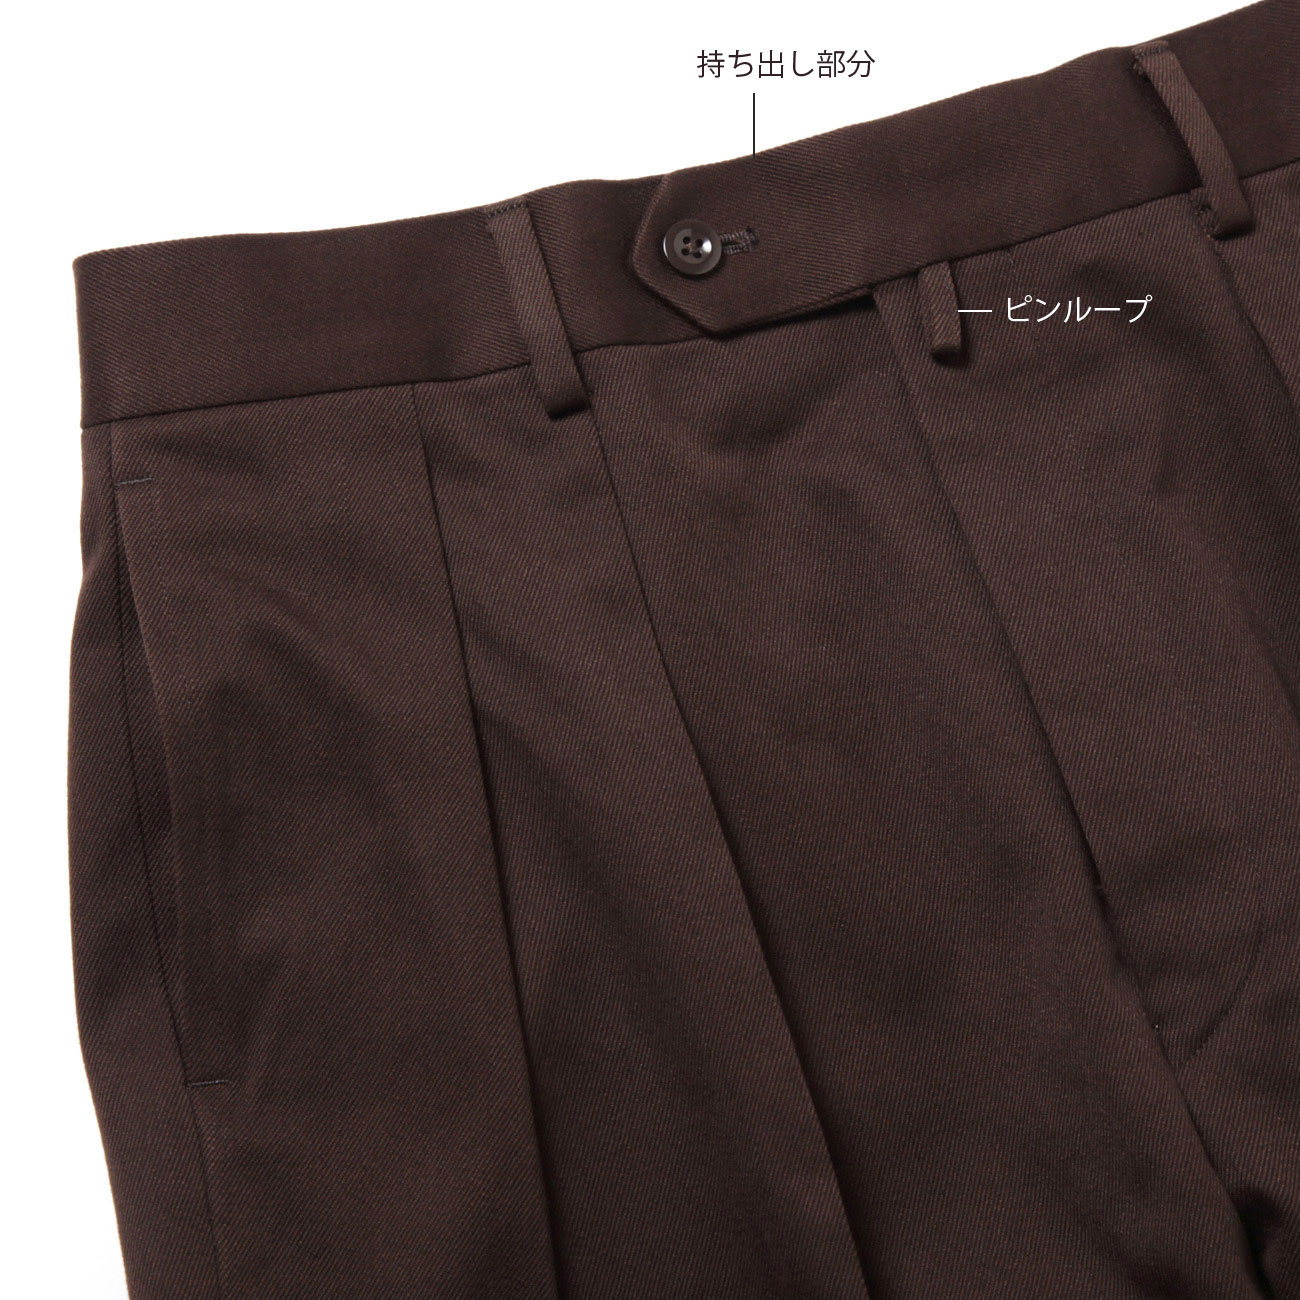 Sustainable Drill Twill Cotton Standard Type I - Brown　2タック